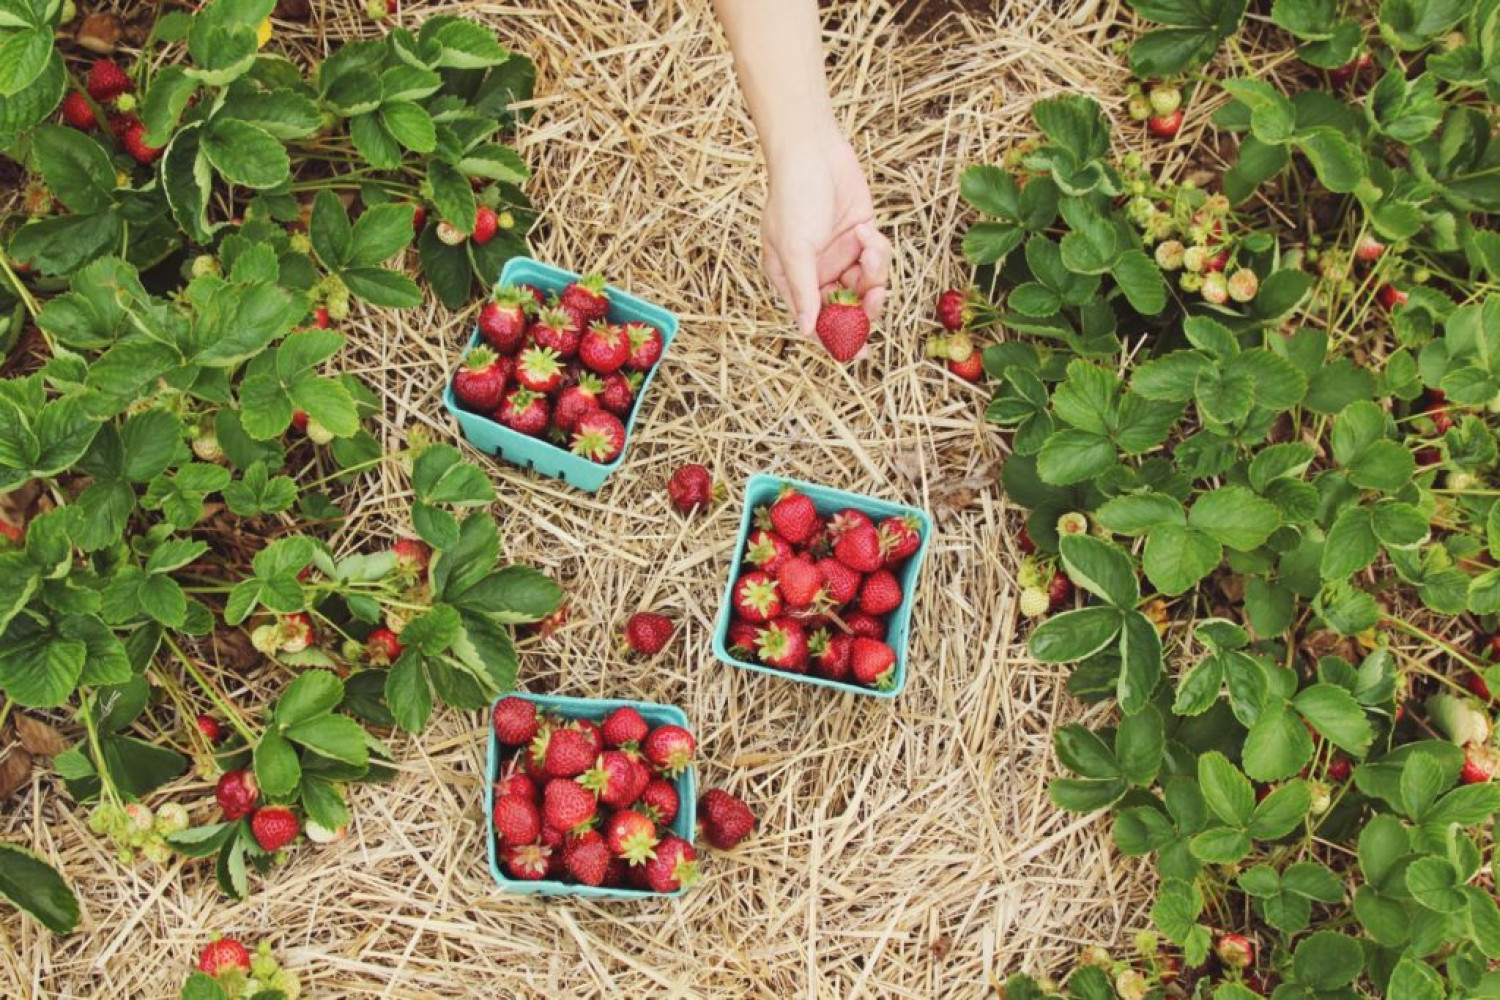 Strawberry plants and strawberries in baskets on a bed of straw - Online Sustainability Workshop 